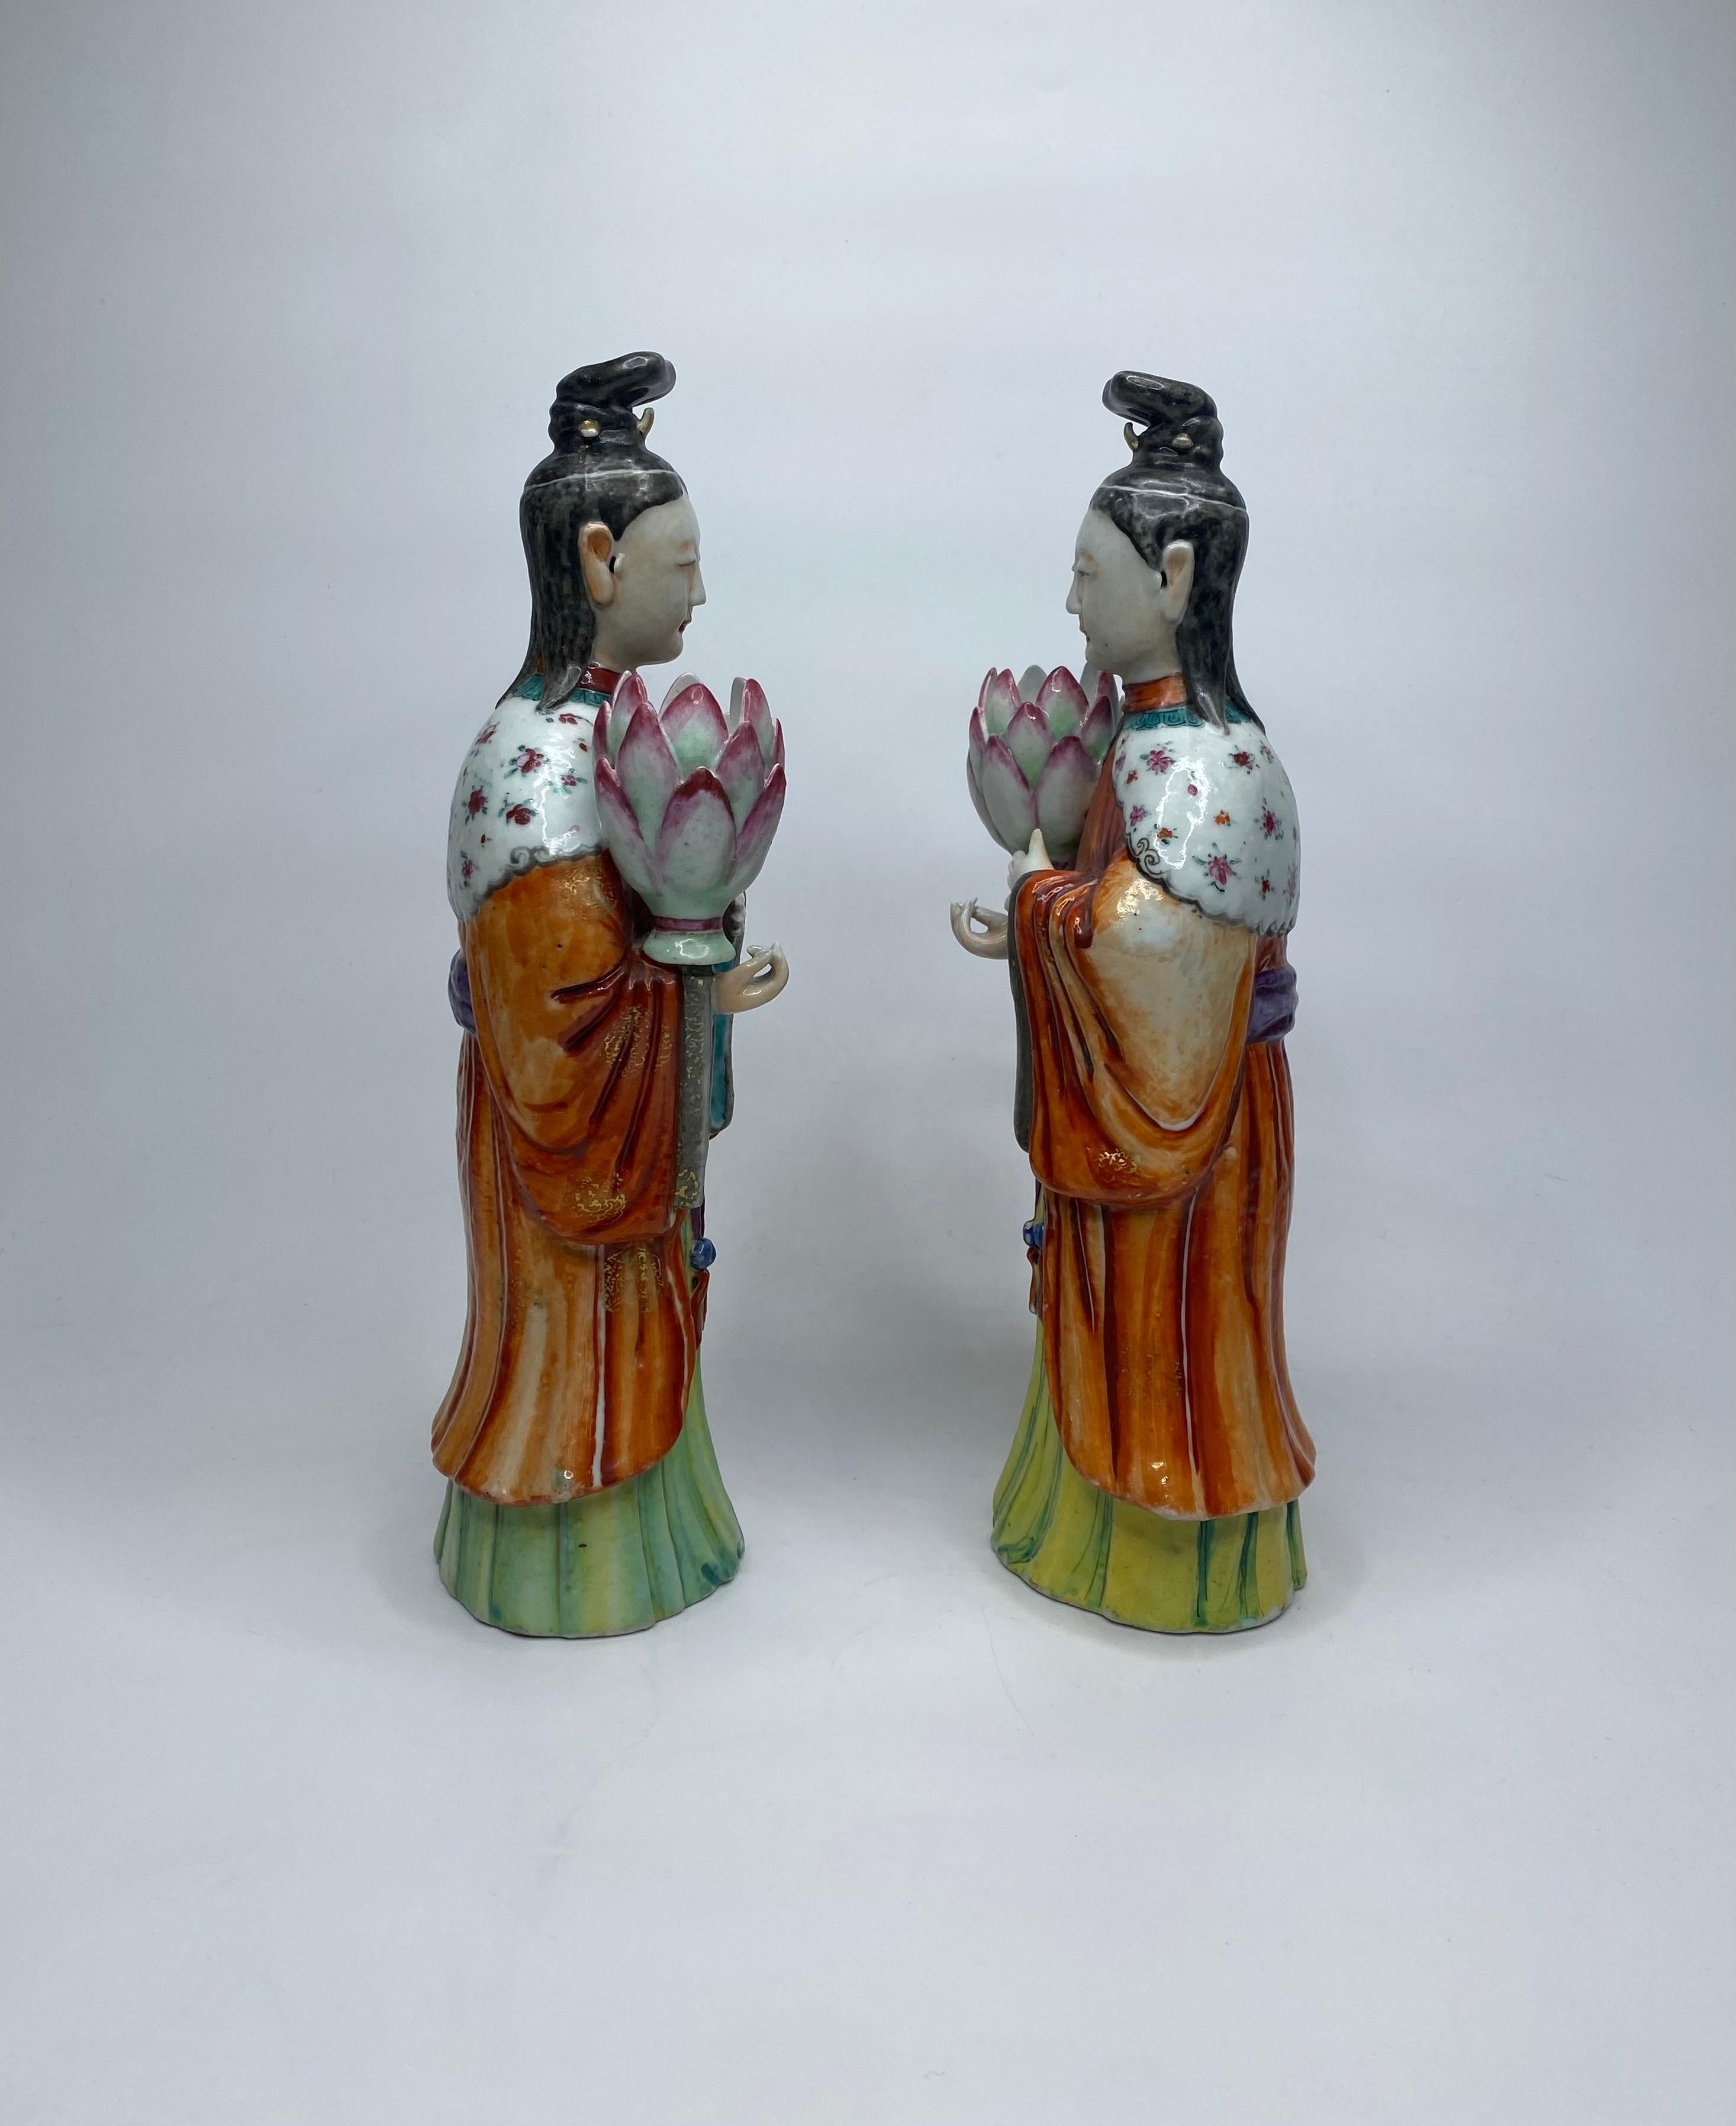 A fine pair of Chinese porcelain candlestick figures, c. 1760, Qianlong Period. Modelled as Court Ladies, holding large lotus pods, wearing flowing robes, decorated in vibrant famille rose enamels, beneath capes, painted with sprigs of